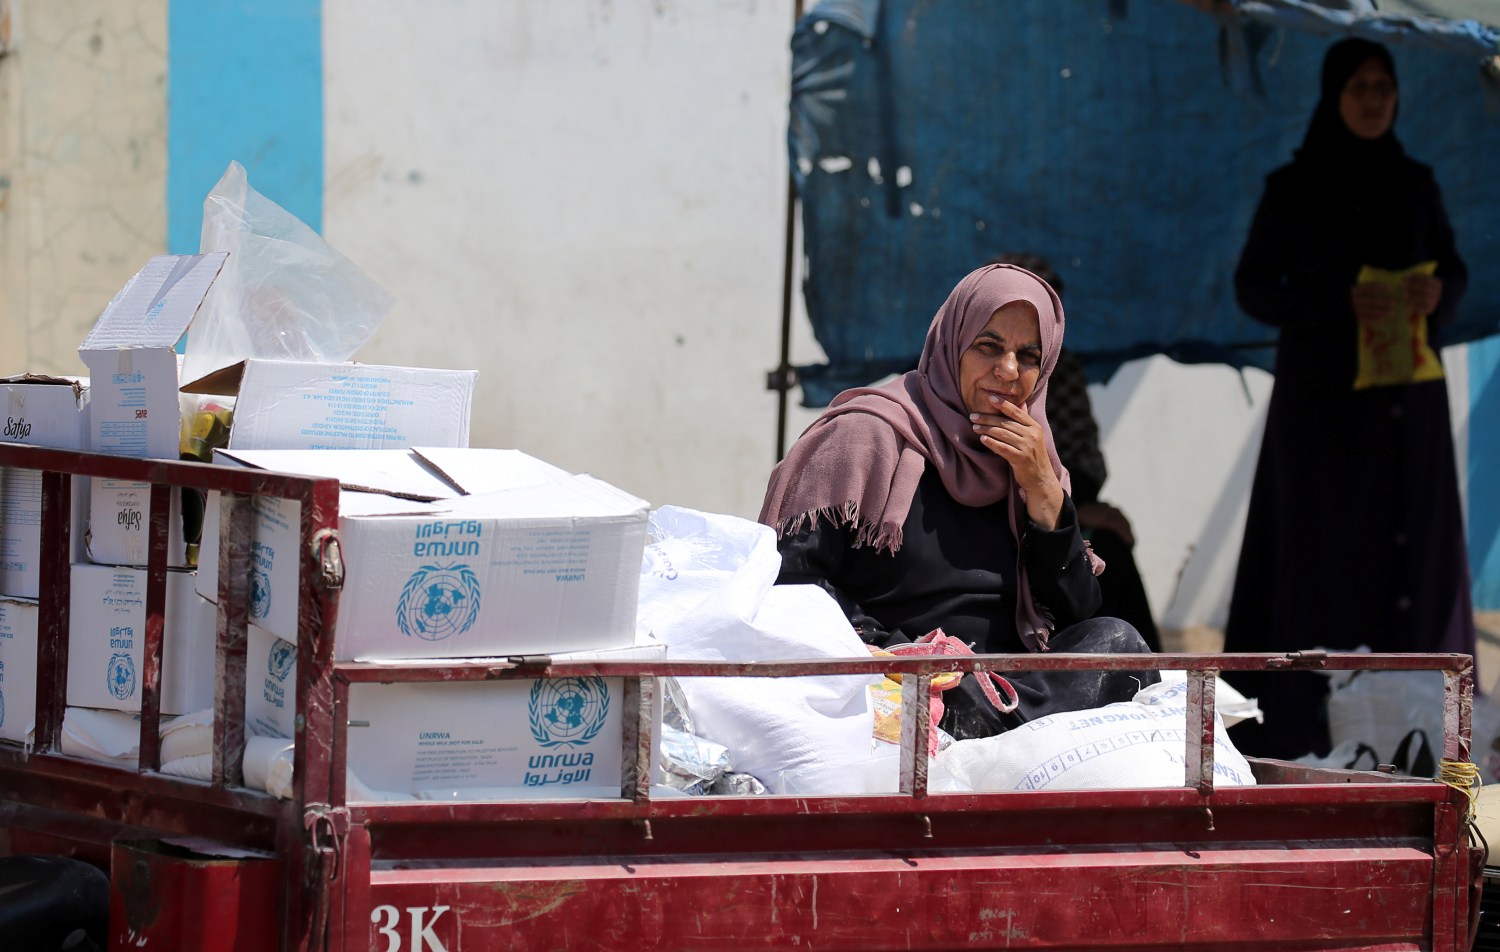 A Palestinian woman sits in a motorised vehicle loaded with aid, outside a distribution center run by the United Nations Relief and Works Agency (UNRWA), in Khan Younis in the southern Gaza Strip September 4, 2018. REUTERS/Ibraheem Abu Mustafa - RC1A87FA4580